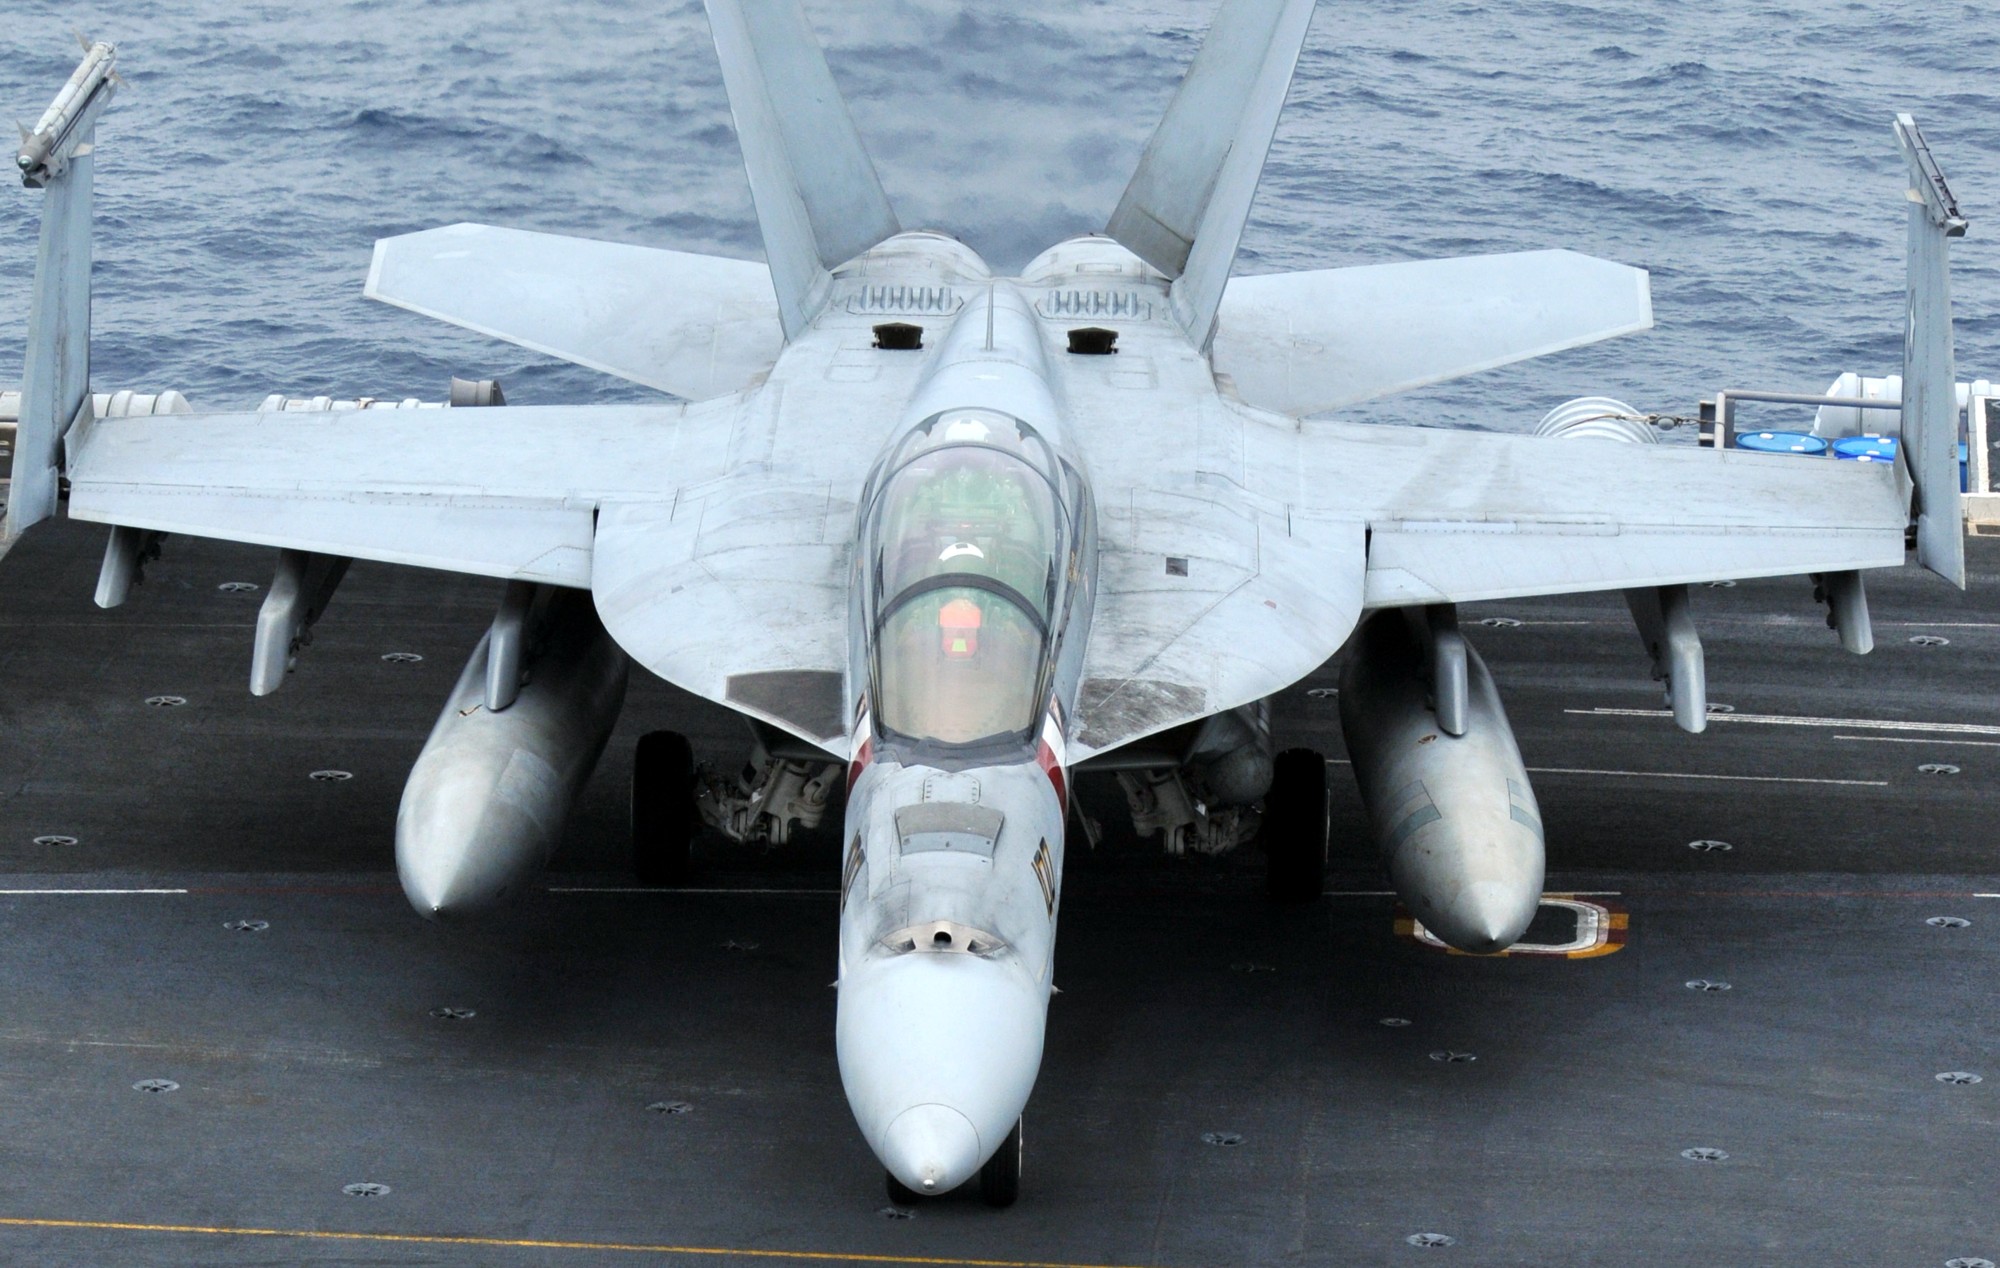 vfa-2 bounty hunters strike fighter squadron us navy f/a-18f super hornet carrier air wing cvw-2 uss abraham lincoln cvn-72 74